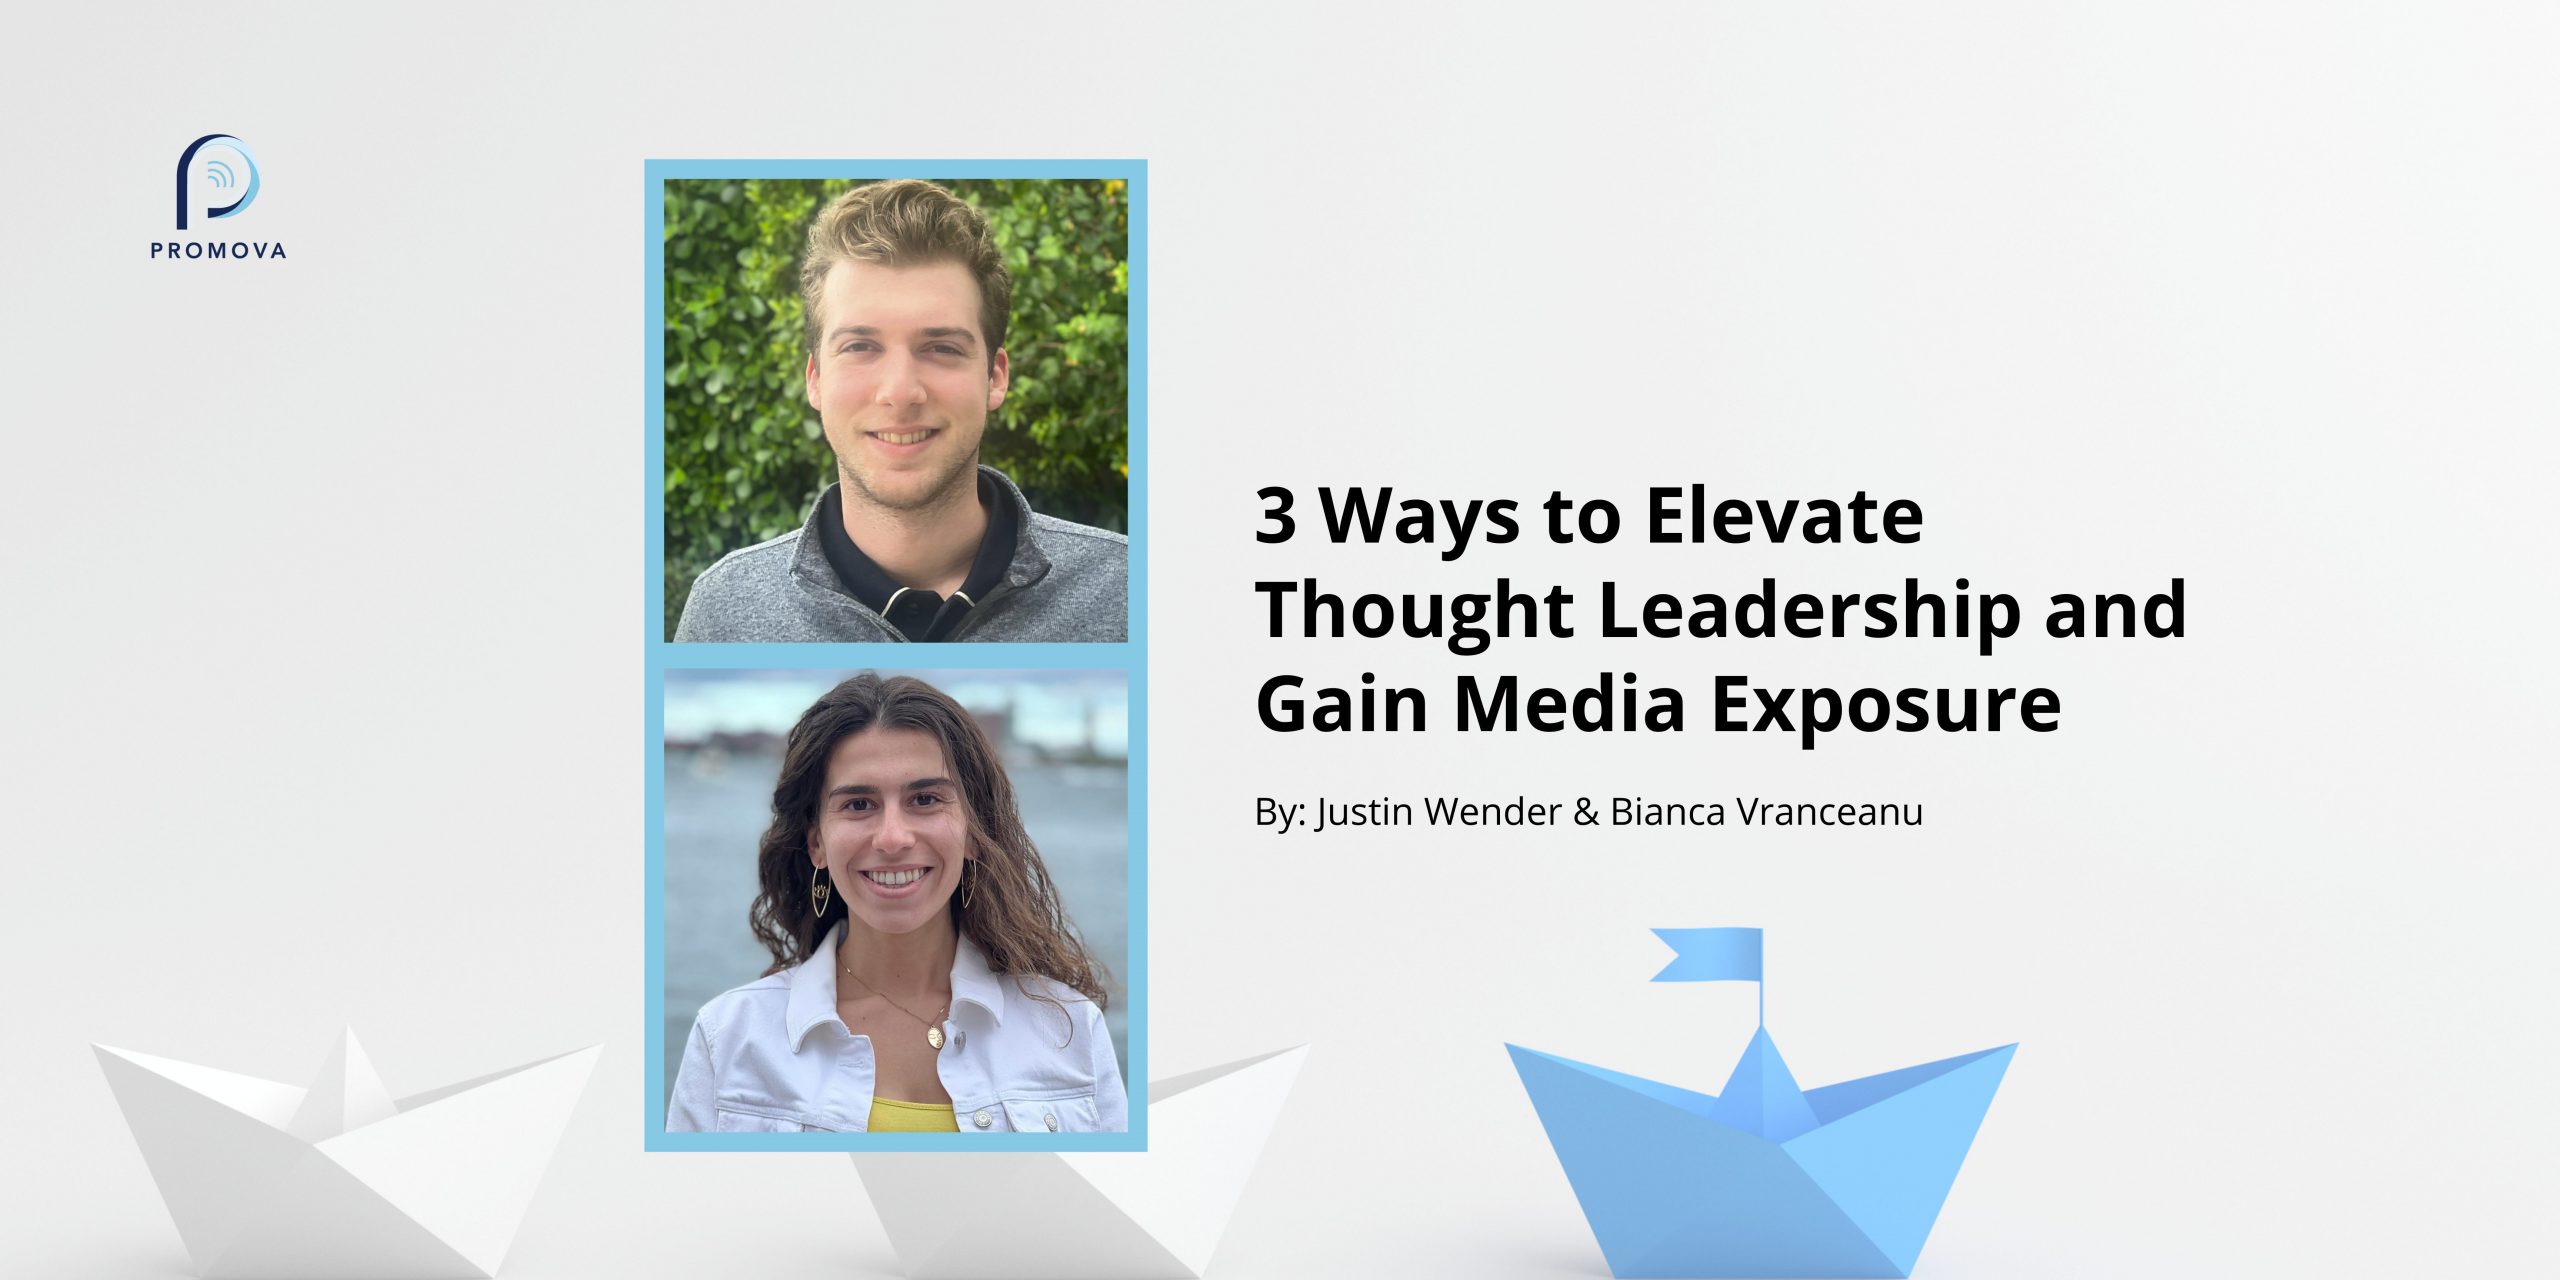 Featured image for “3 Ways to Elevate Thought Leadership and Gain Media Exposure”